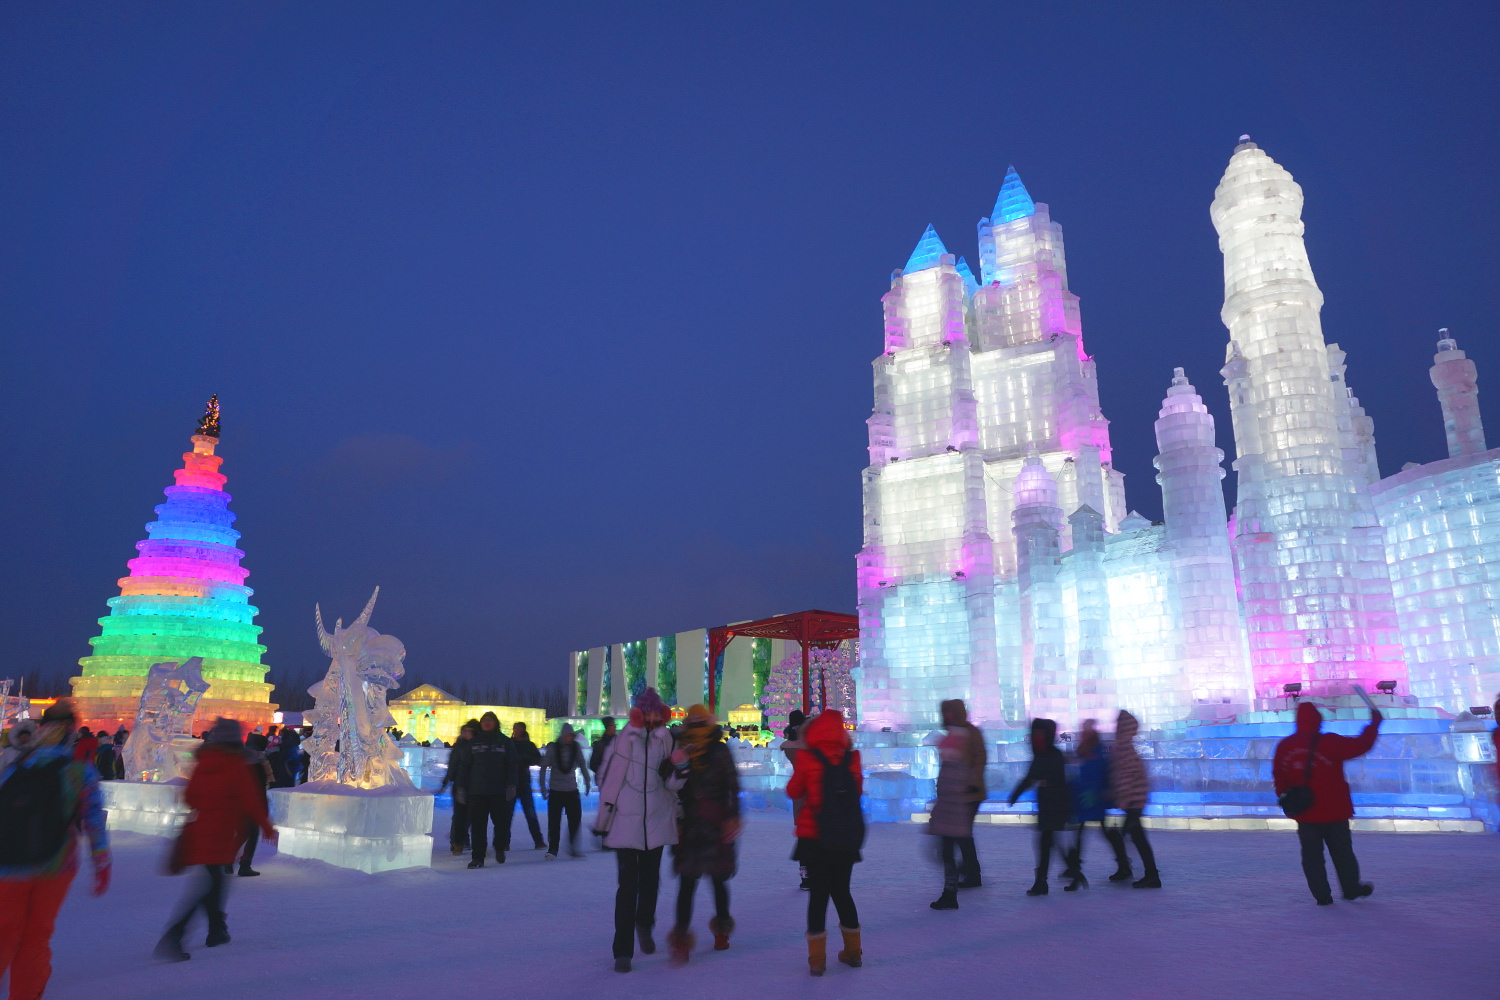 Colourful ice towers oversee Harbin's Ice and Snow World. Image by Anita Isalska / londoninfopage